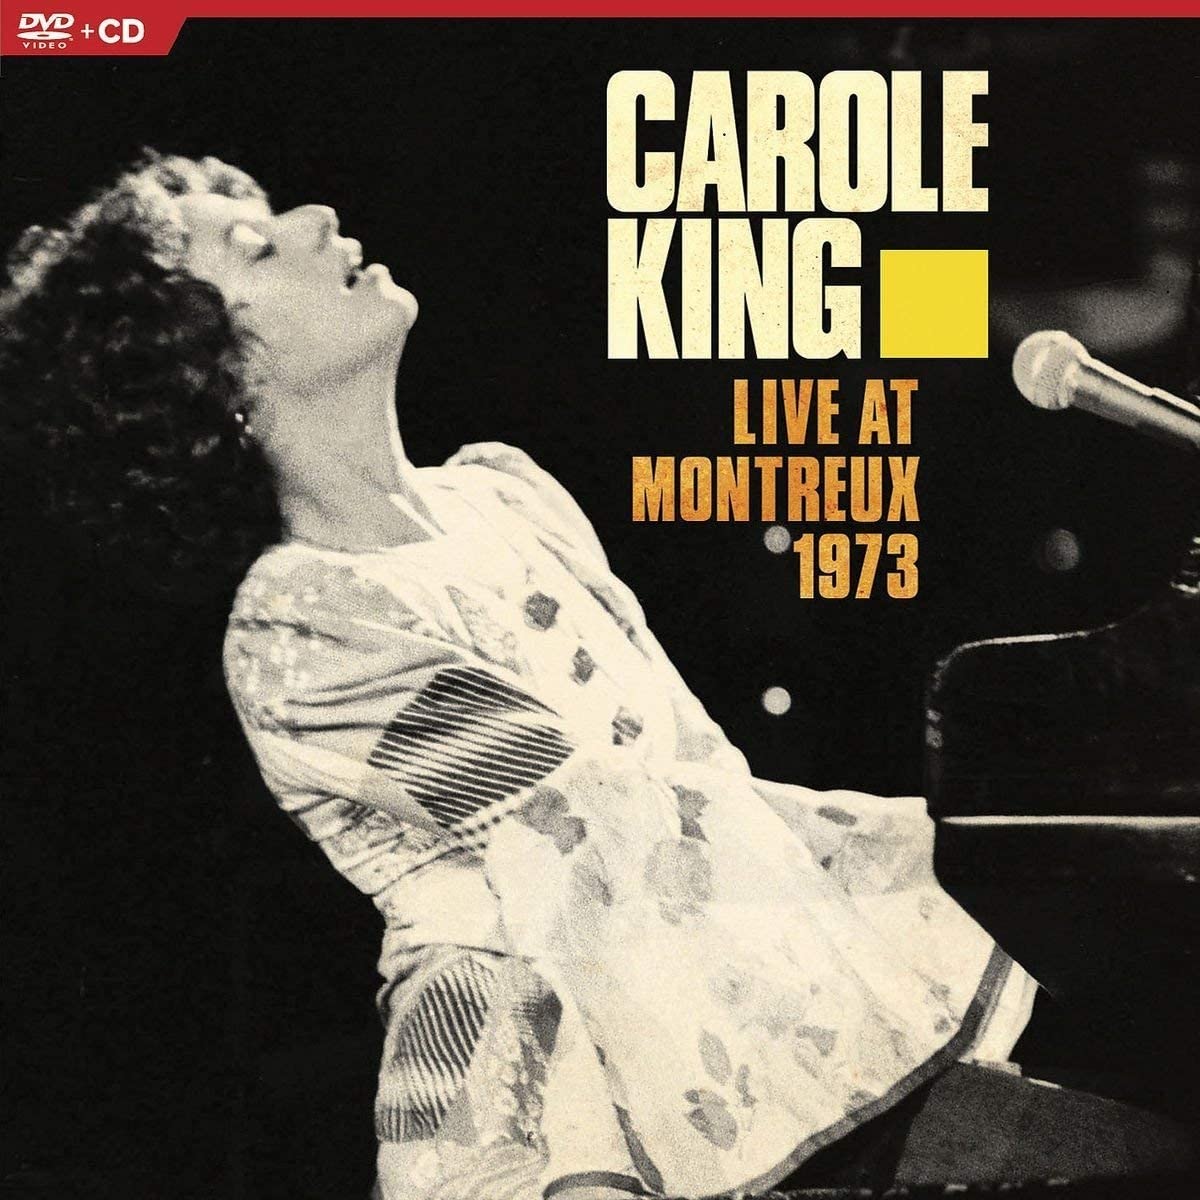 Carole, King/Live at Montreux 1973 (DVD+CD) [DVD + BNS CD]